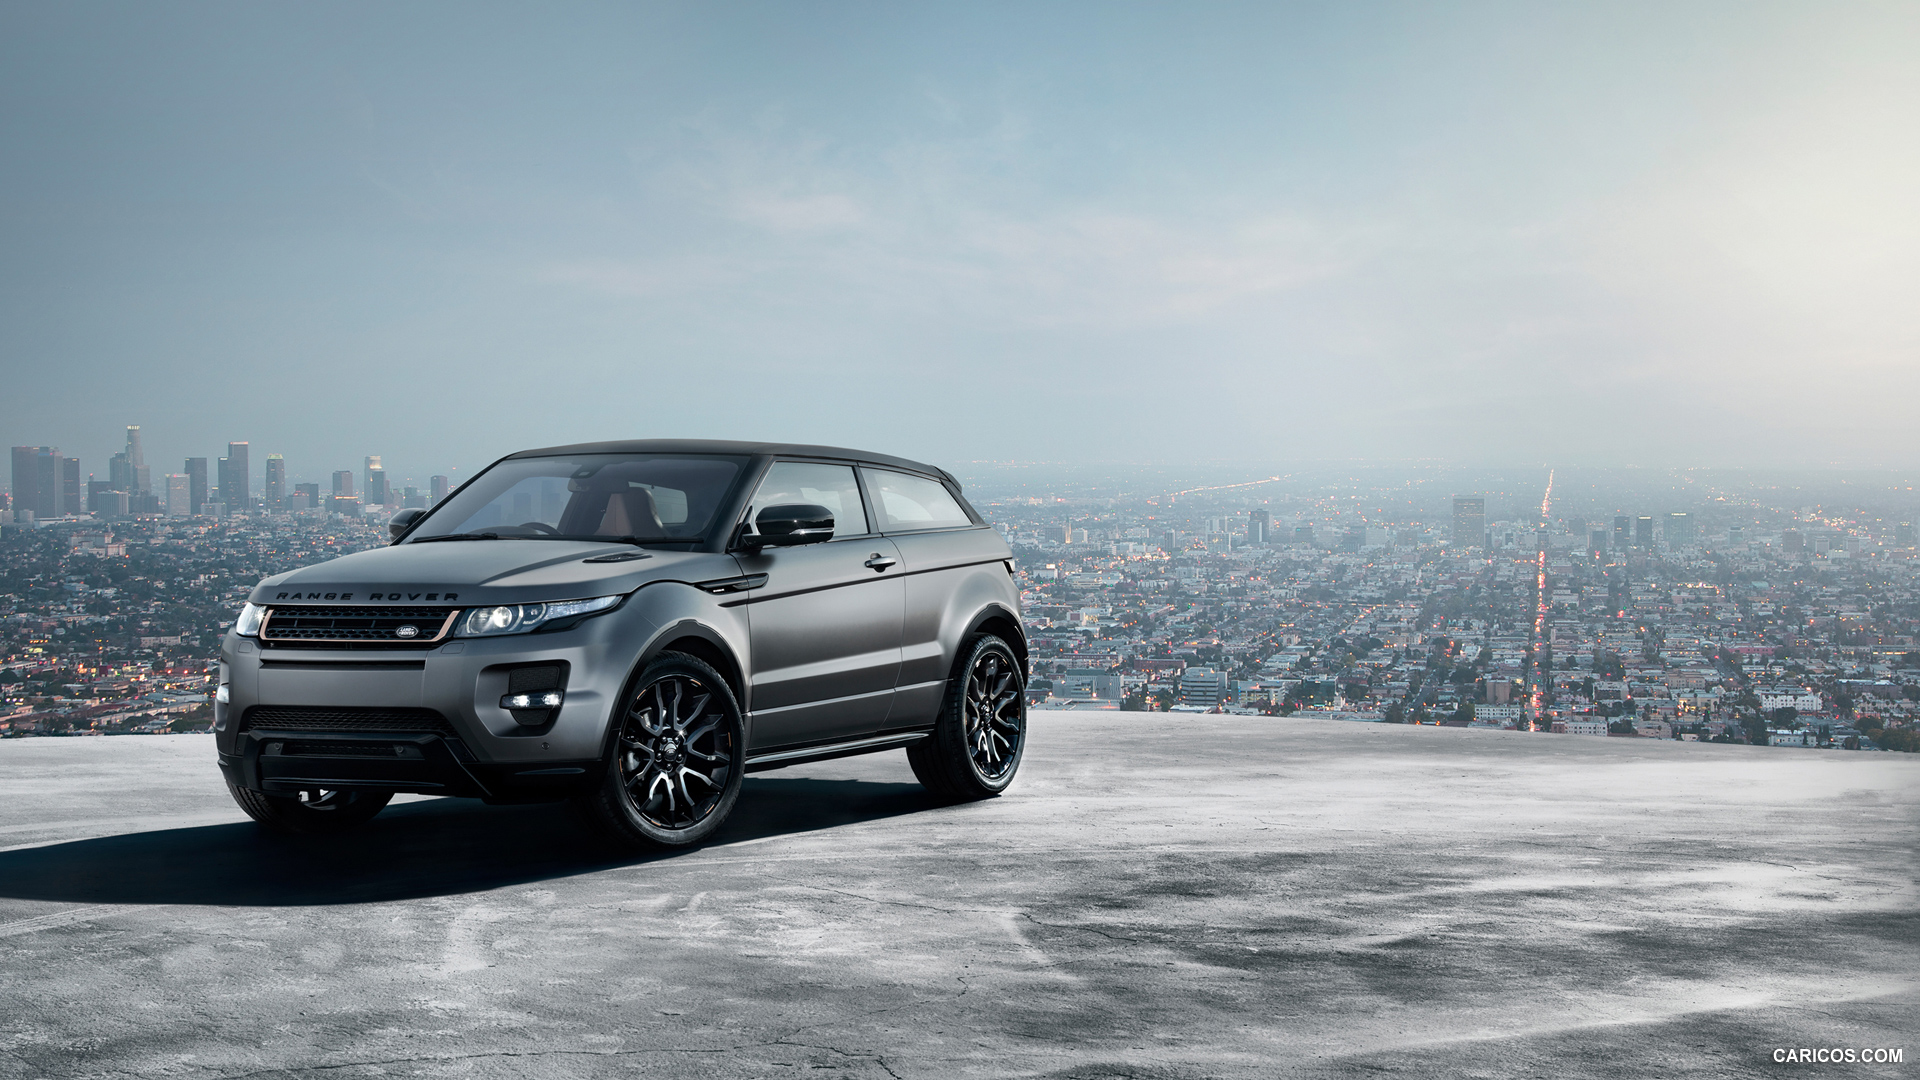 Range Rover Evoque Windows Theme And Pictures All For